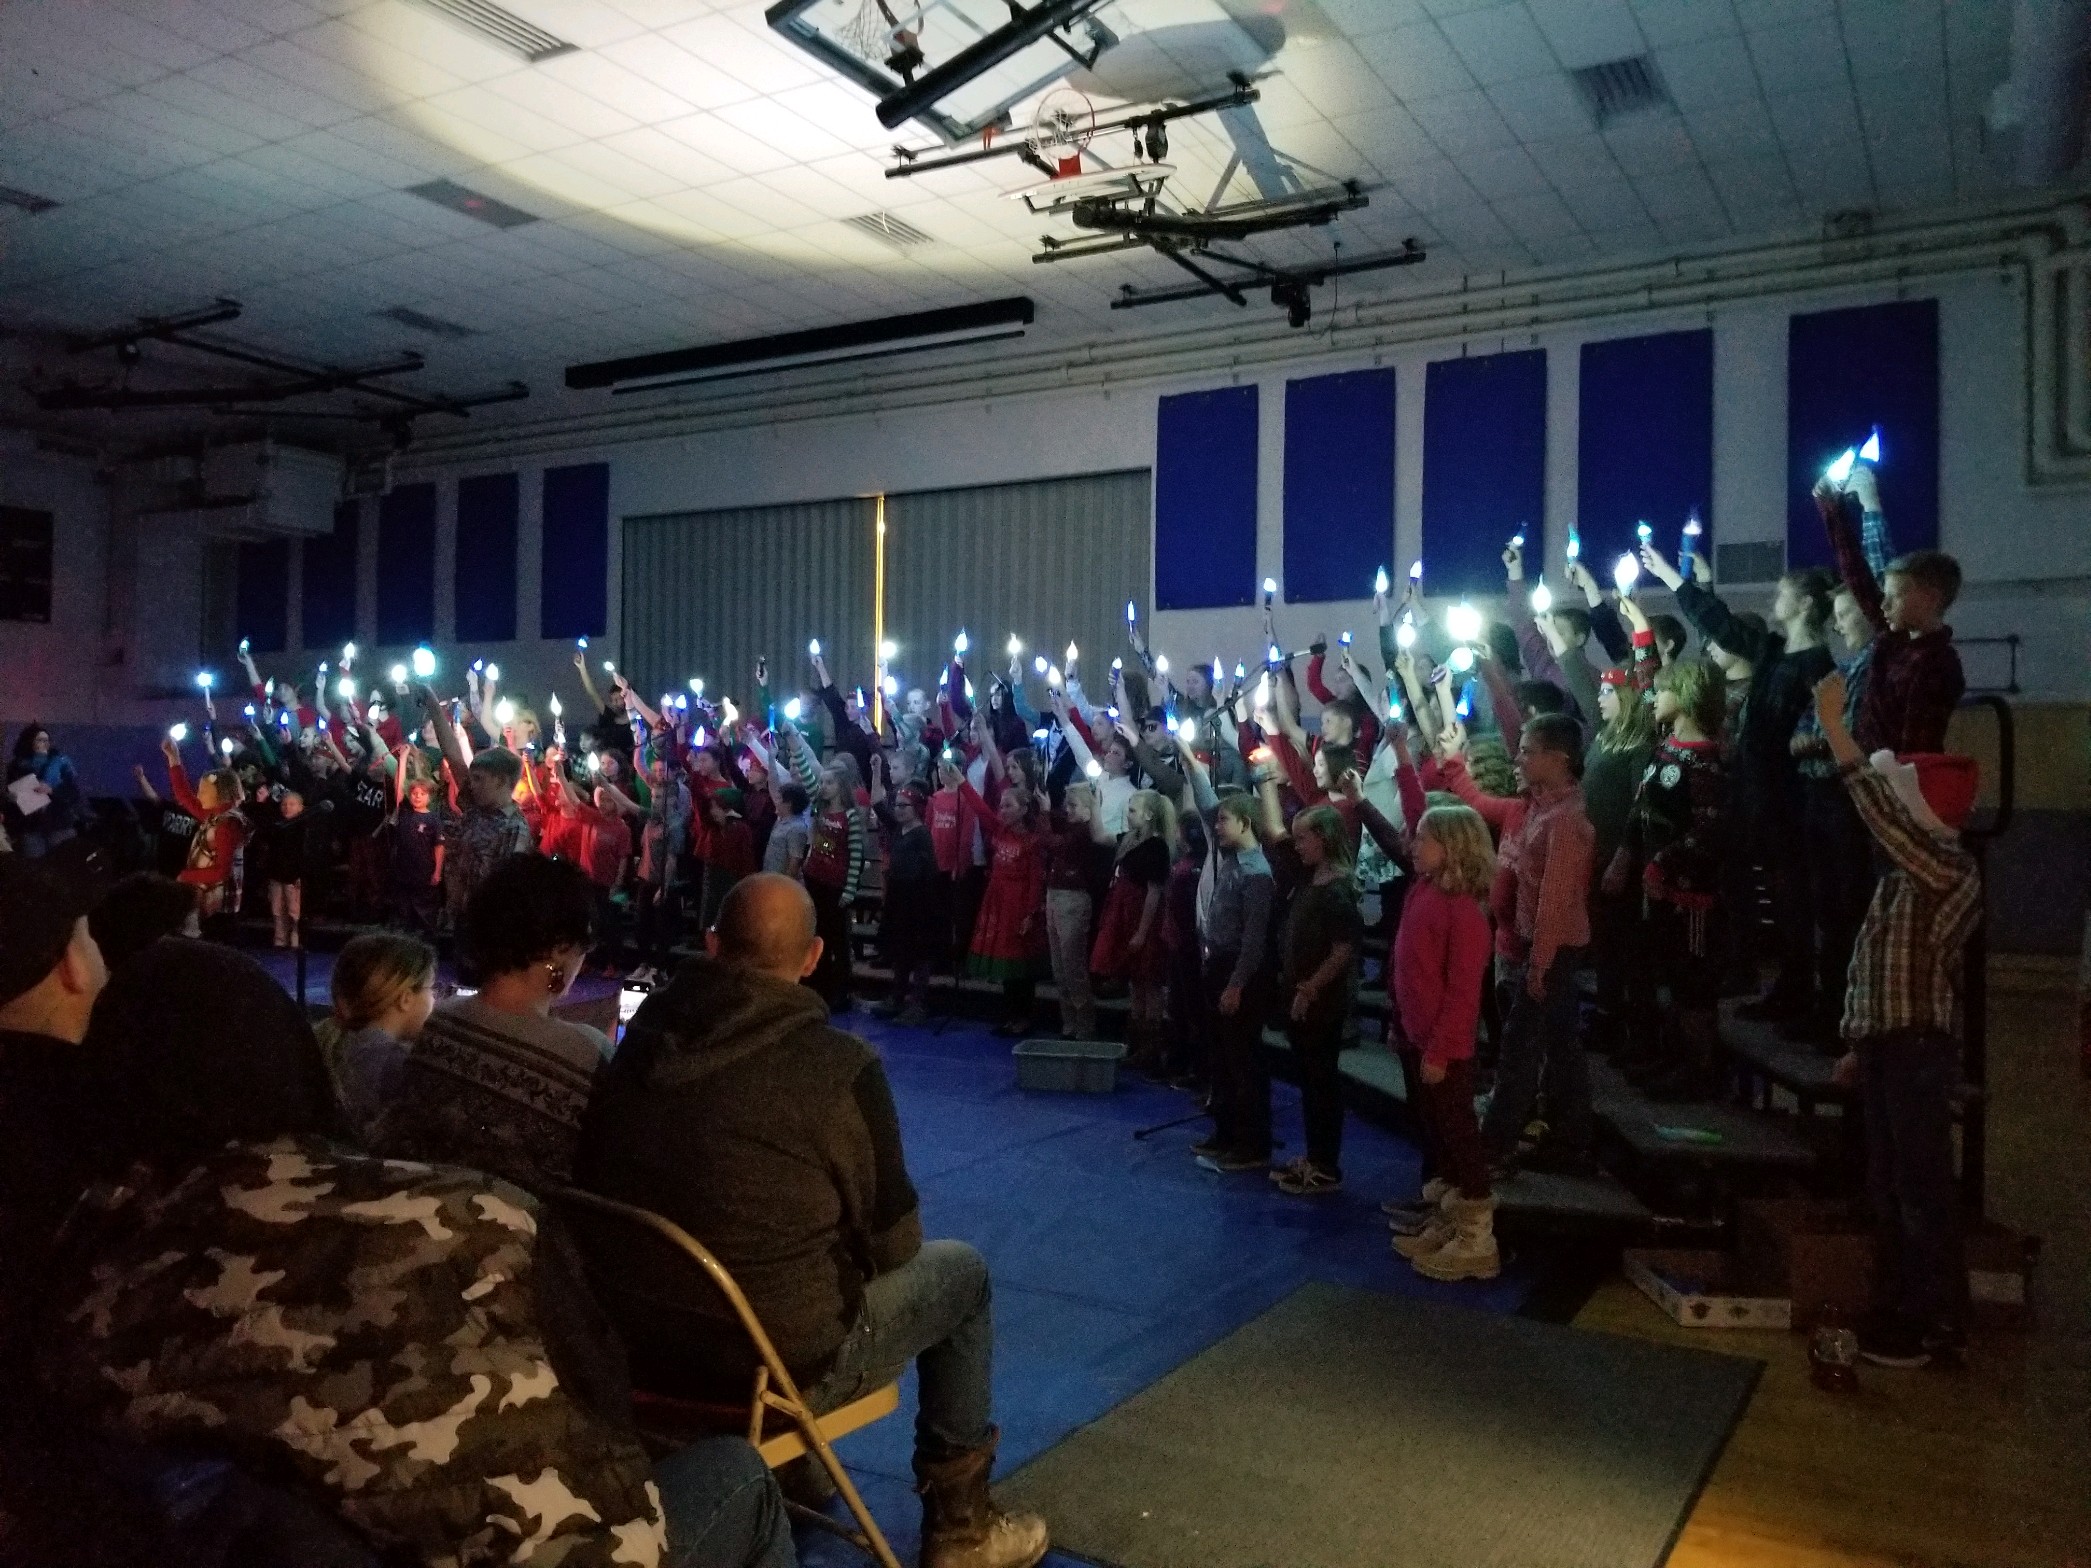 4th and 5th grade students sing Snowmaggedden with Icicle flashlights.  